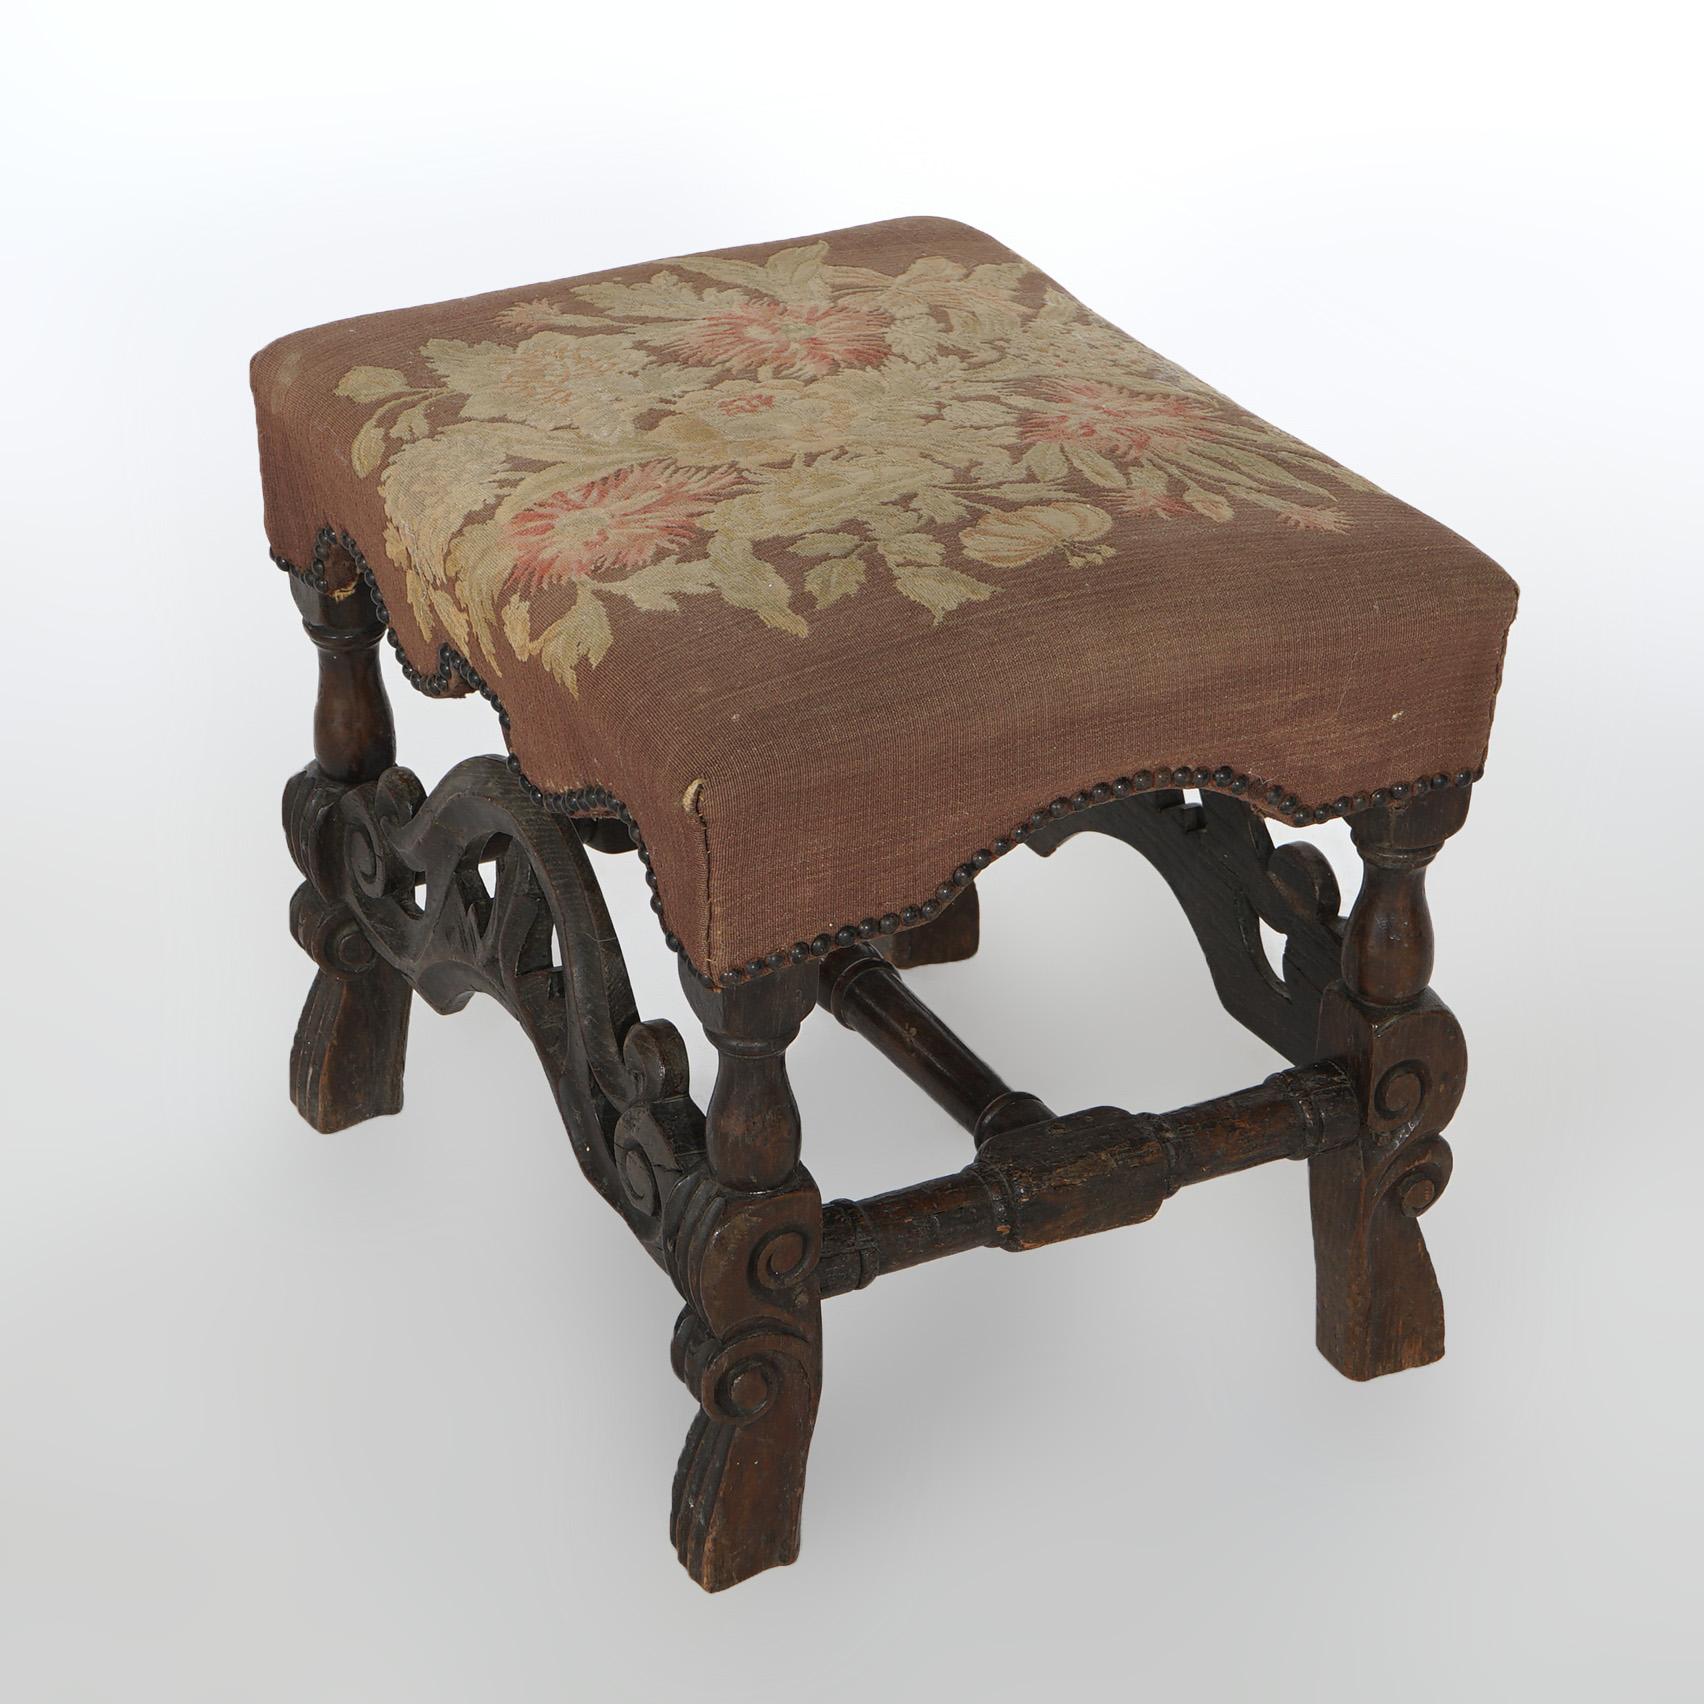 Upholstery Early Antique English Carved Walnut & Needlepoint Bench (Stool) Circa 1690 For Sale